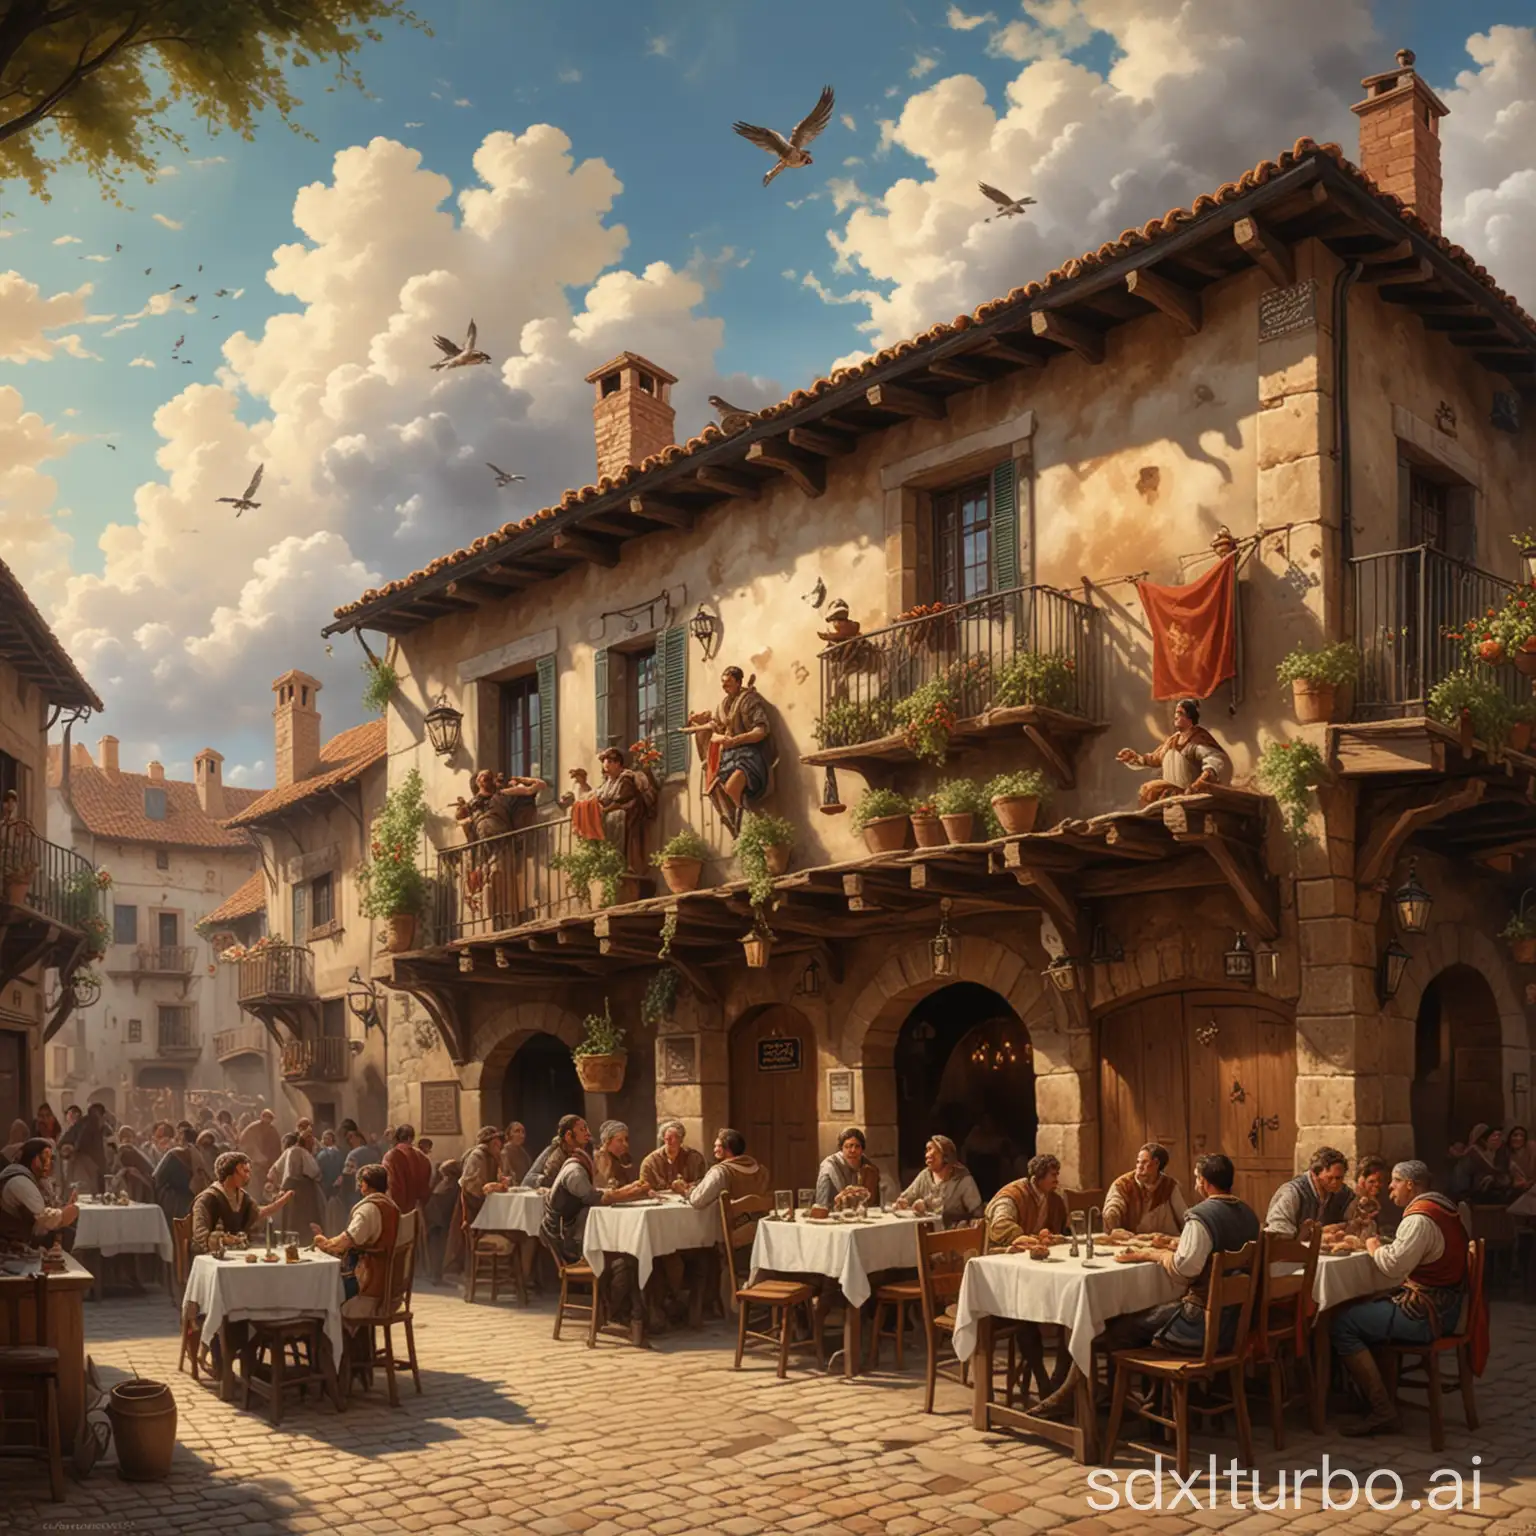 People celebrating in a Spanish tavern in the 1400s in a medieval era, 14th-century painting style, tavern with outdoor seating, curly clouds in the sky above the tavern, people celebrating in the tavern, small sparrows in the sky